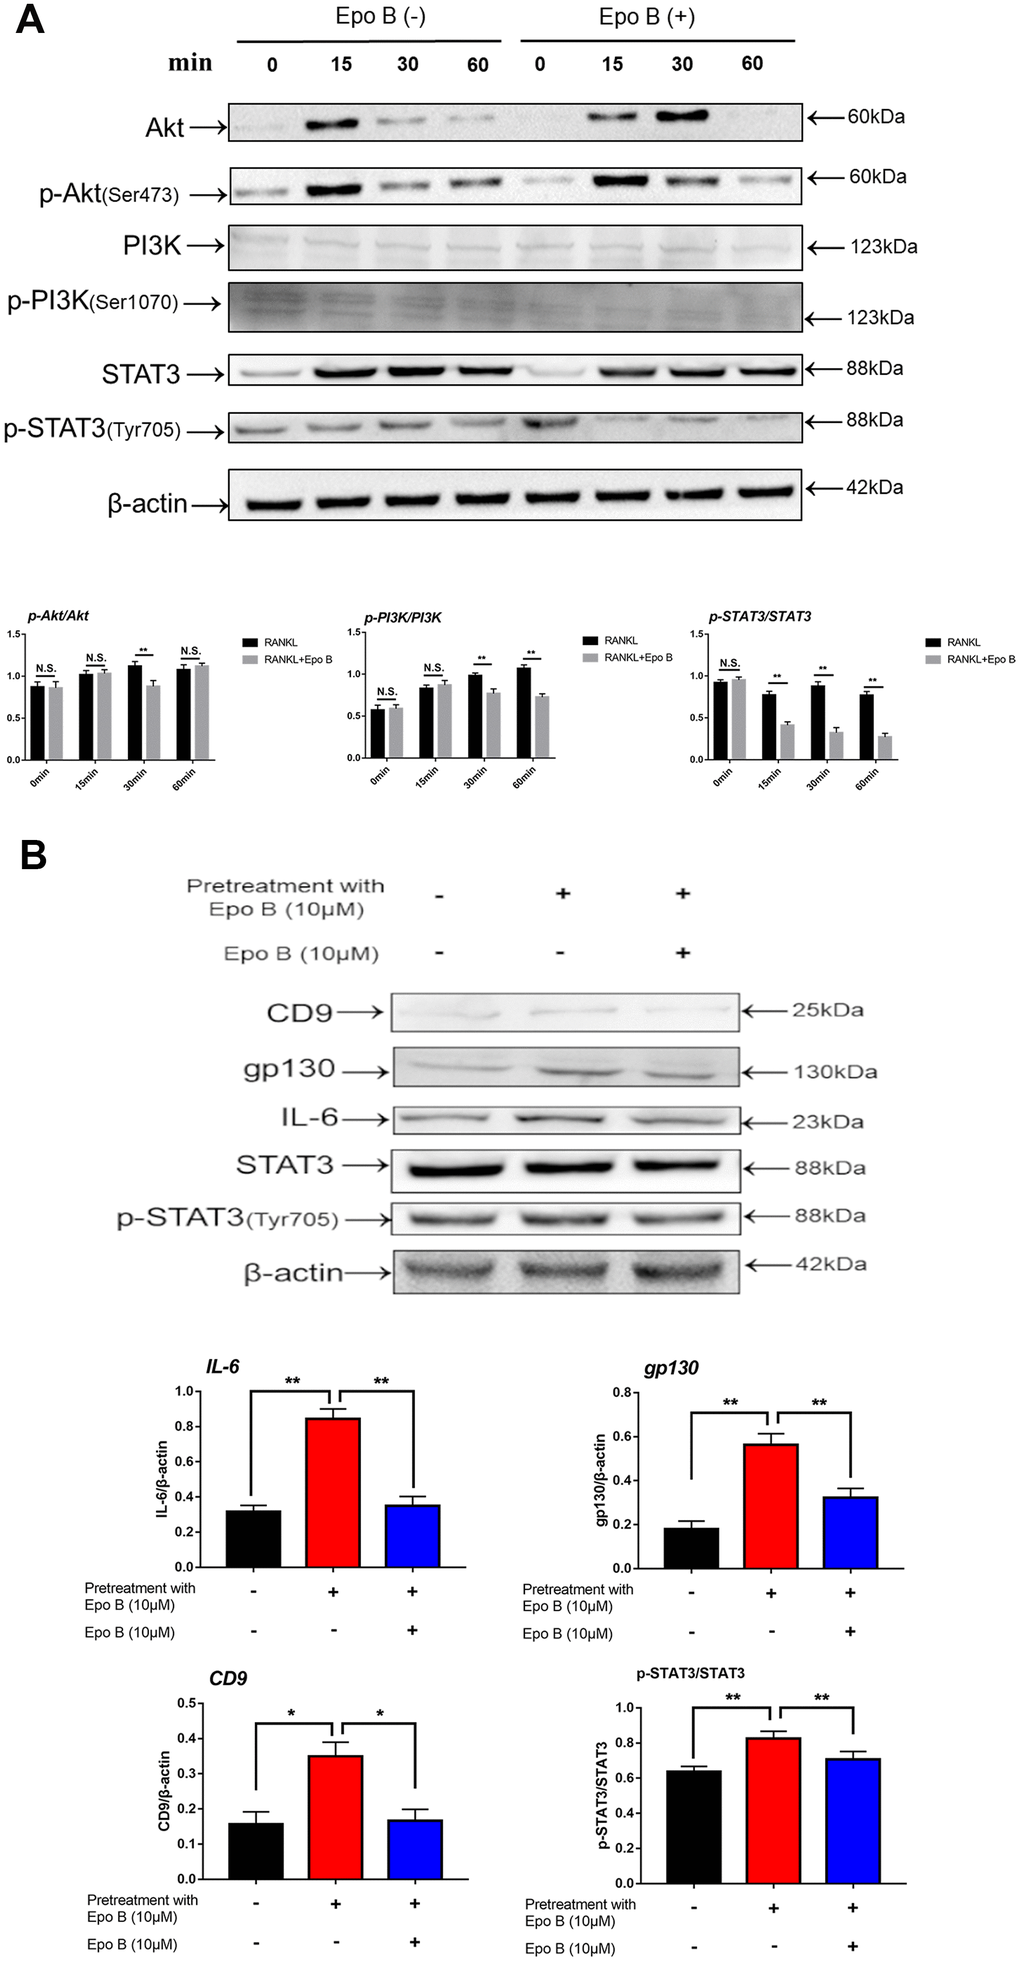 Epothilone B significantly restrained STAT3 signal pathway both in direct and indirect manner. (A) RAW264.7 cells were stimulated with RANKL (100ng/mL) with or without Epothilone B (10μM) for the 0-60 minutes. The expression of p-Akt, Akt, p-PI3K, PI3K, p-STAT3 and STAT3. (B) RAW264.7 cells were divided into 3 groups. One group was pretreated with RANKL (100ng/mL), M-CSF (100ng/mL) and LPS (100ng/mL) in presence of Epothilone B (10μM) for 24 h. The other two groups were pretreated with RANKL (100ng/mL), M-CSF (100ng/mL) and LPS (100ng/mL) but in absence of Epothilone B (10μM) for 24 h. After that, one group was treated with vehicle, and the others were incubated with Epothilone B (10μM) for 2 h. Next, all groups were treated with RANKL (100ng/mL) for 30 min. The cell lysates were analyzed by Western blot for CD9, IL-6, gp130, STAT3, p-STAT3. β-actin was used as an internal control. Quantification of IL-6, gp130 and CD9 relative to β-actin, and p-STAT3 relative to STAT3. Data in the figures represent mean ± SD. N.S. represented no significant difference. *p 